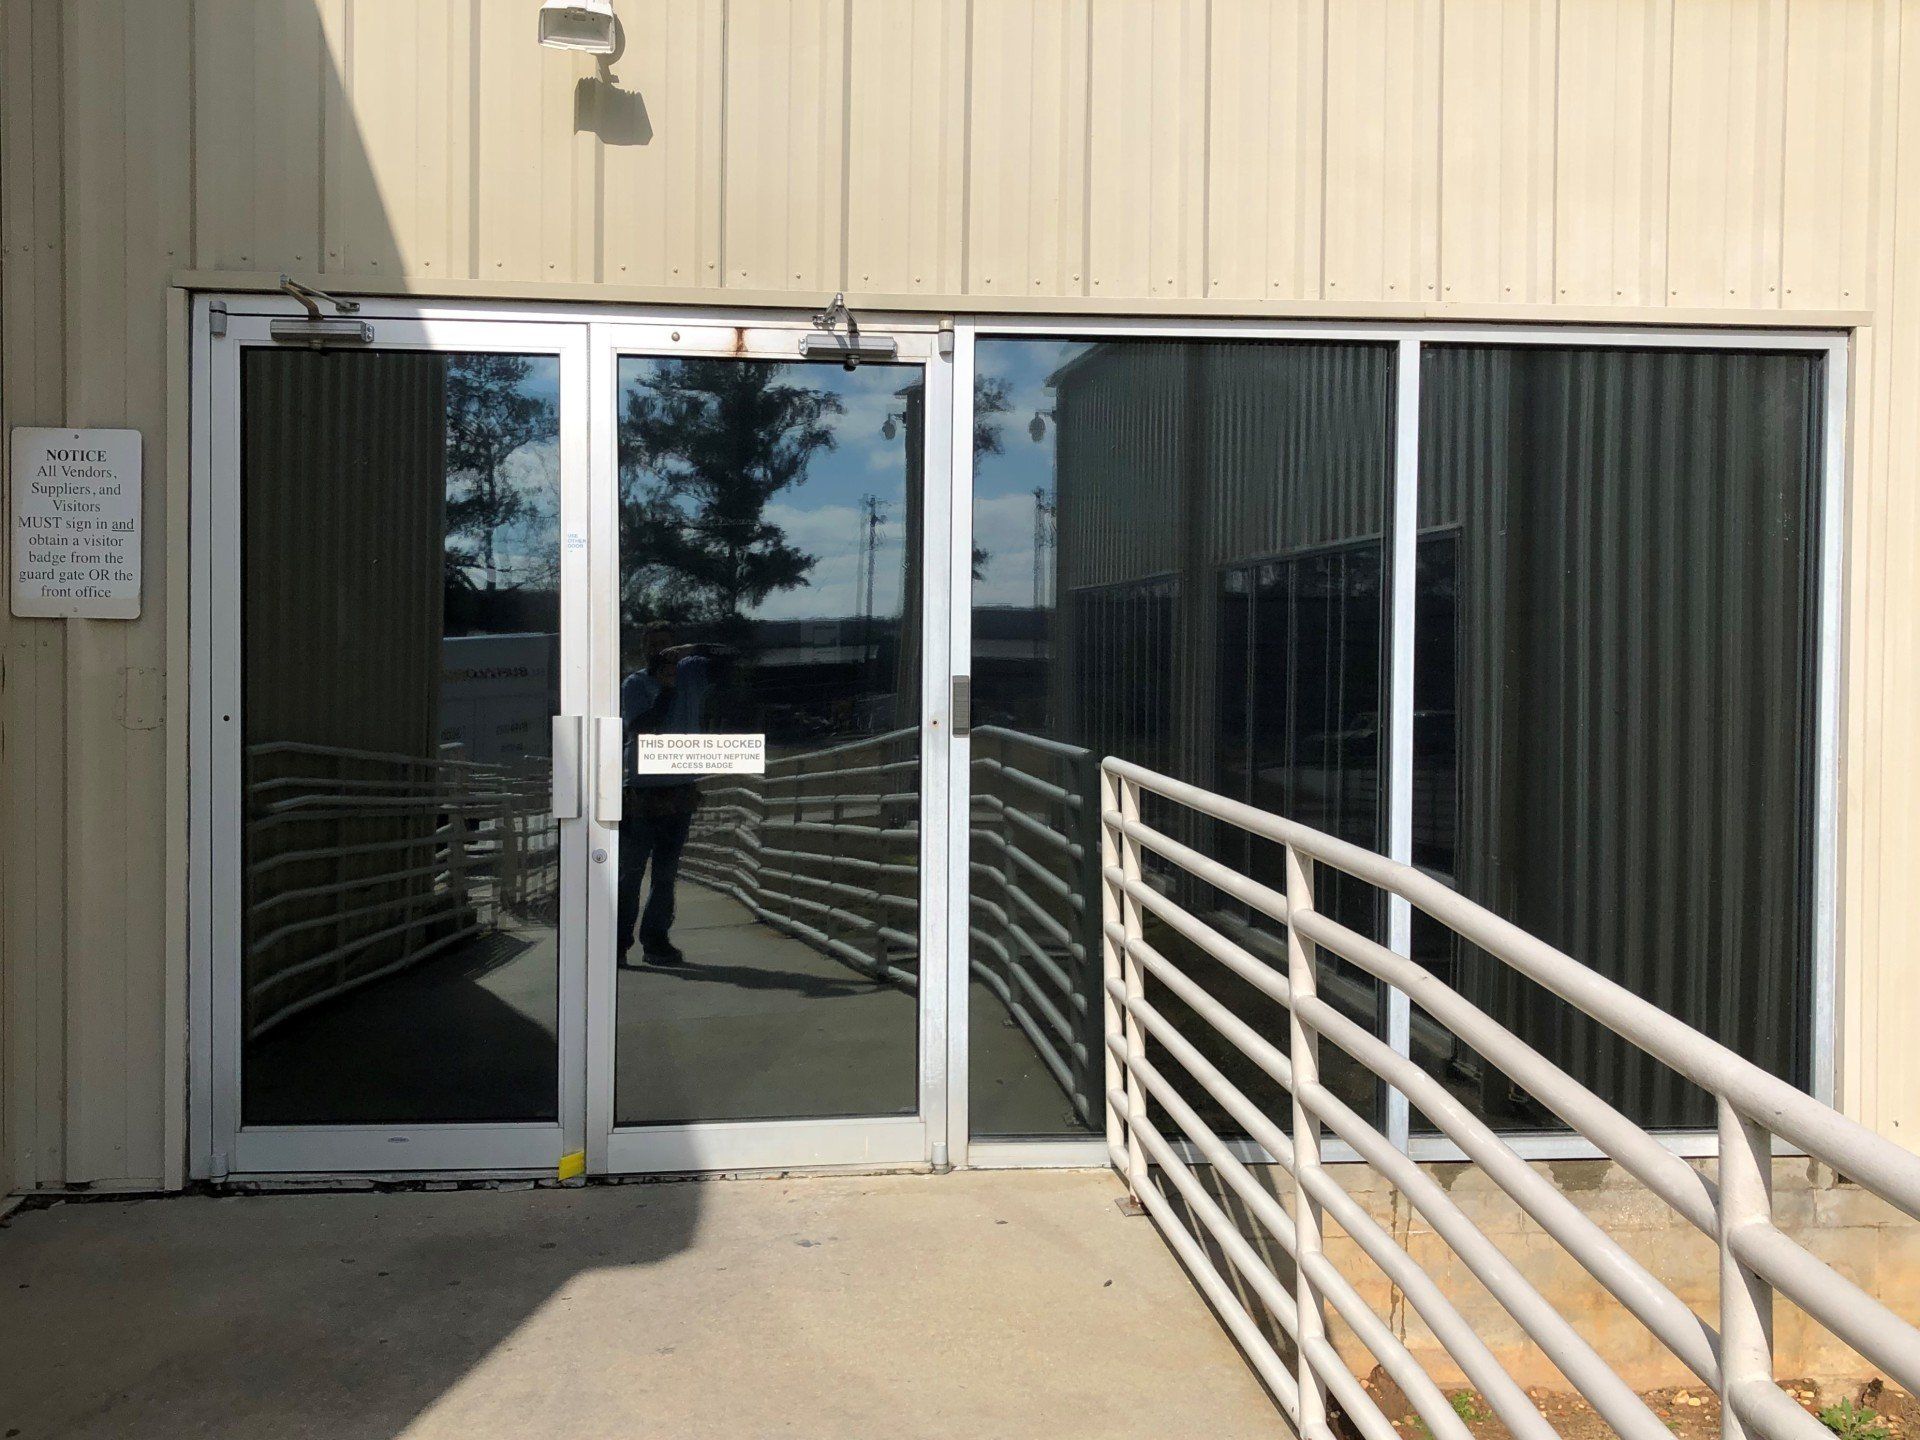 professional business window tinting service - entrance glass doors and windows tinted in Tallassee, AL